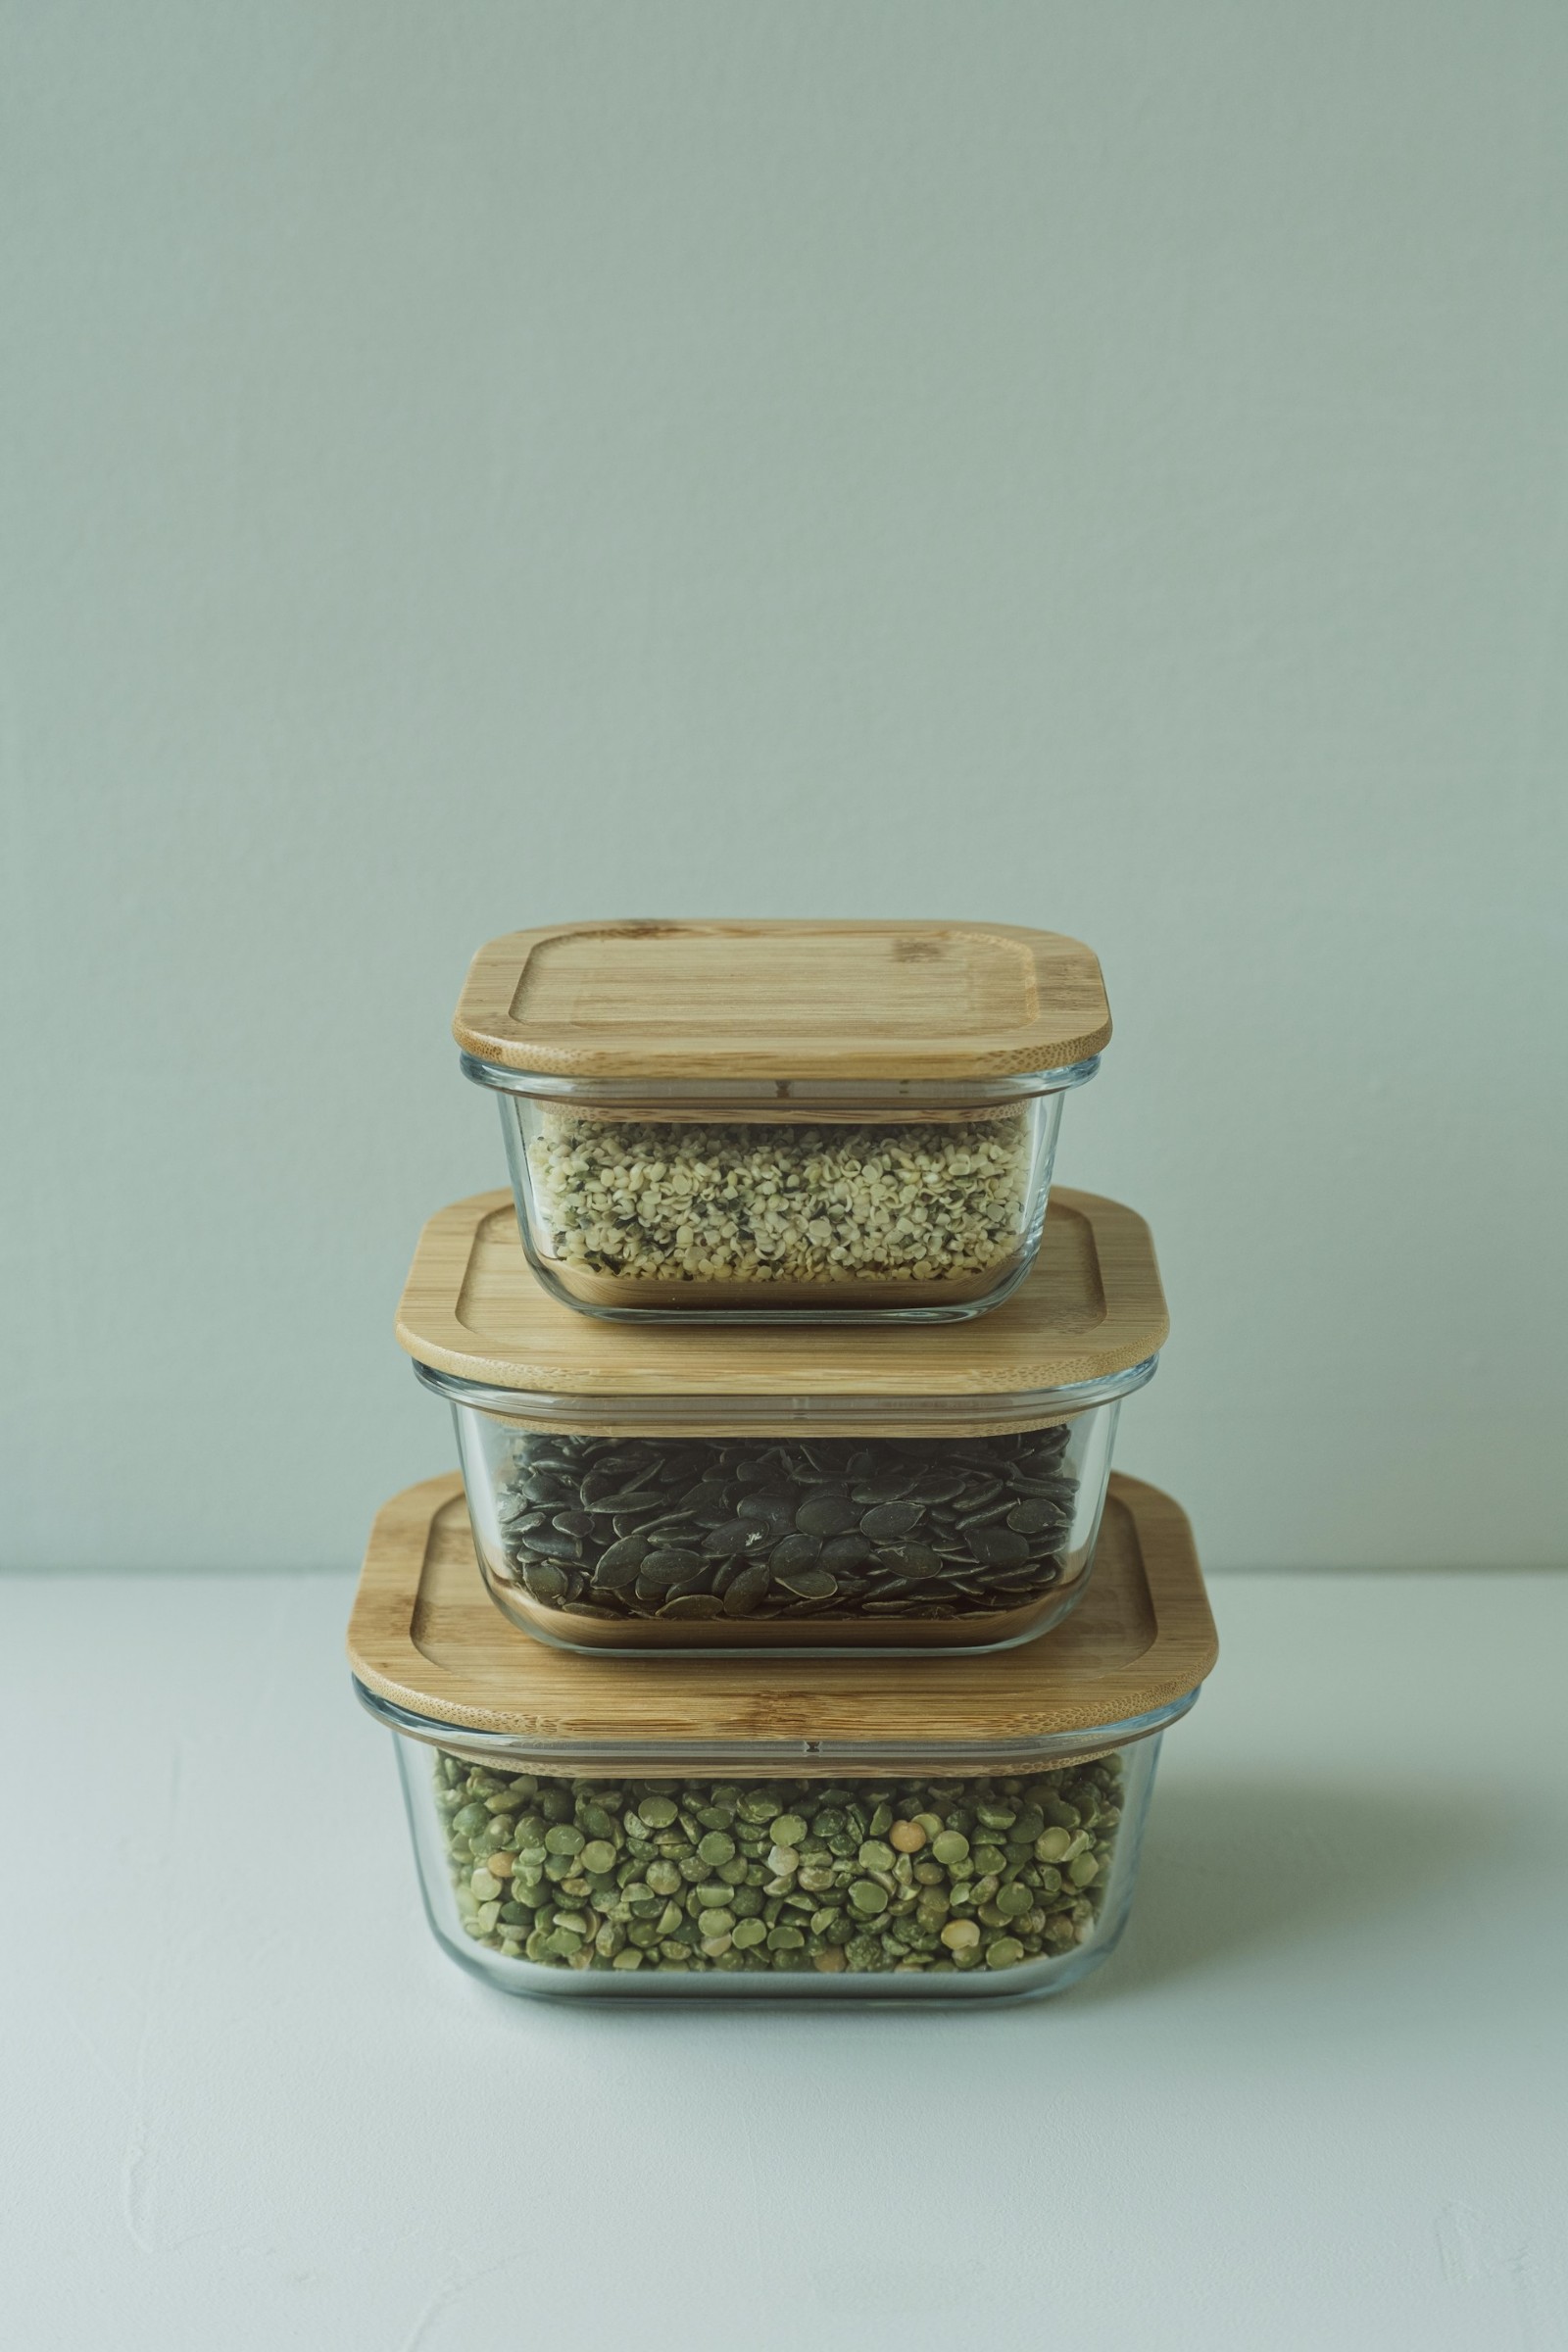 Three glass storage containers filled with lentils and rice.